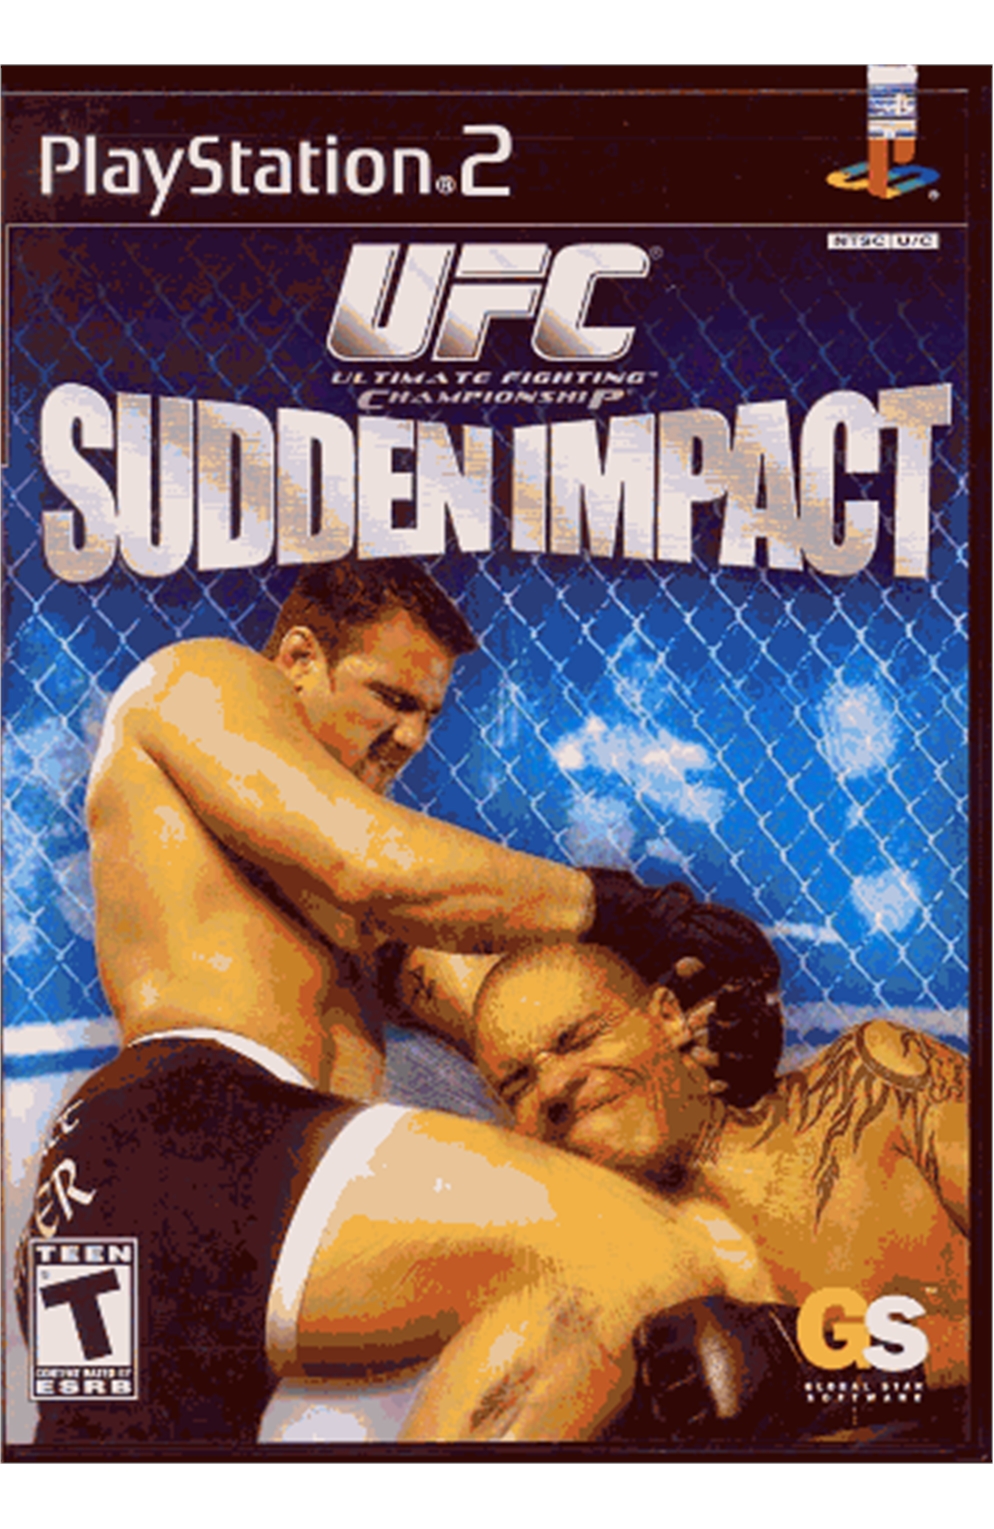 Playstation 2 Ps2 Ufc Sudden Impact